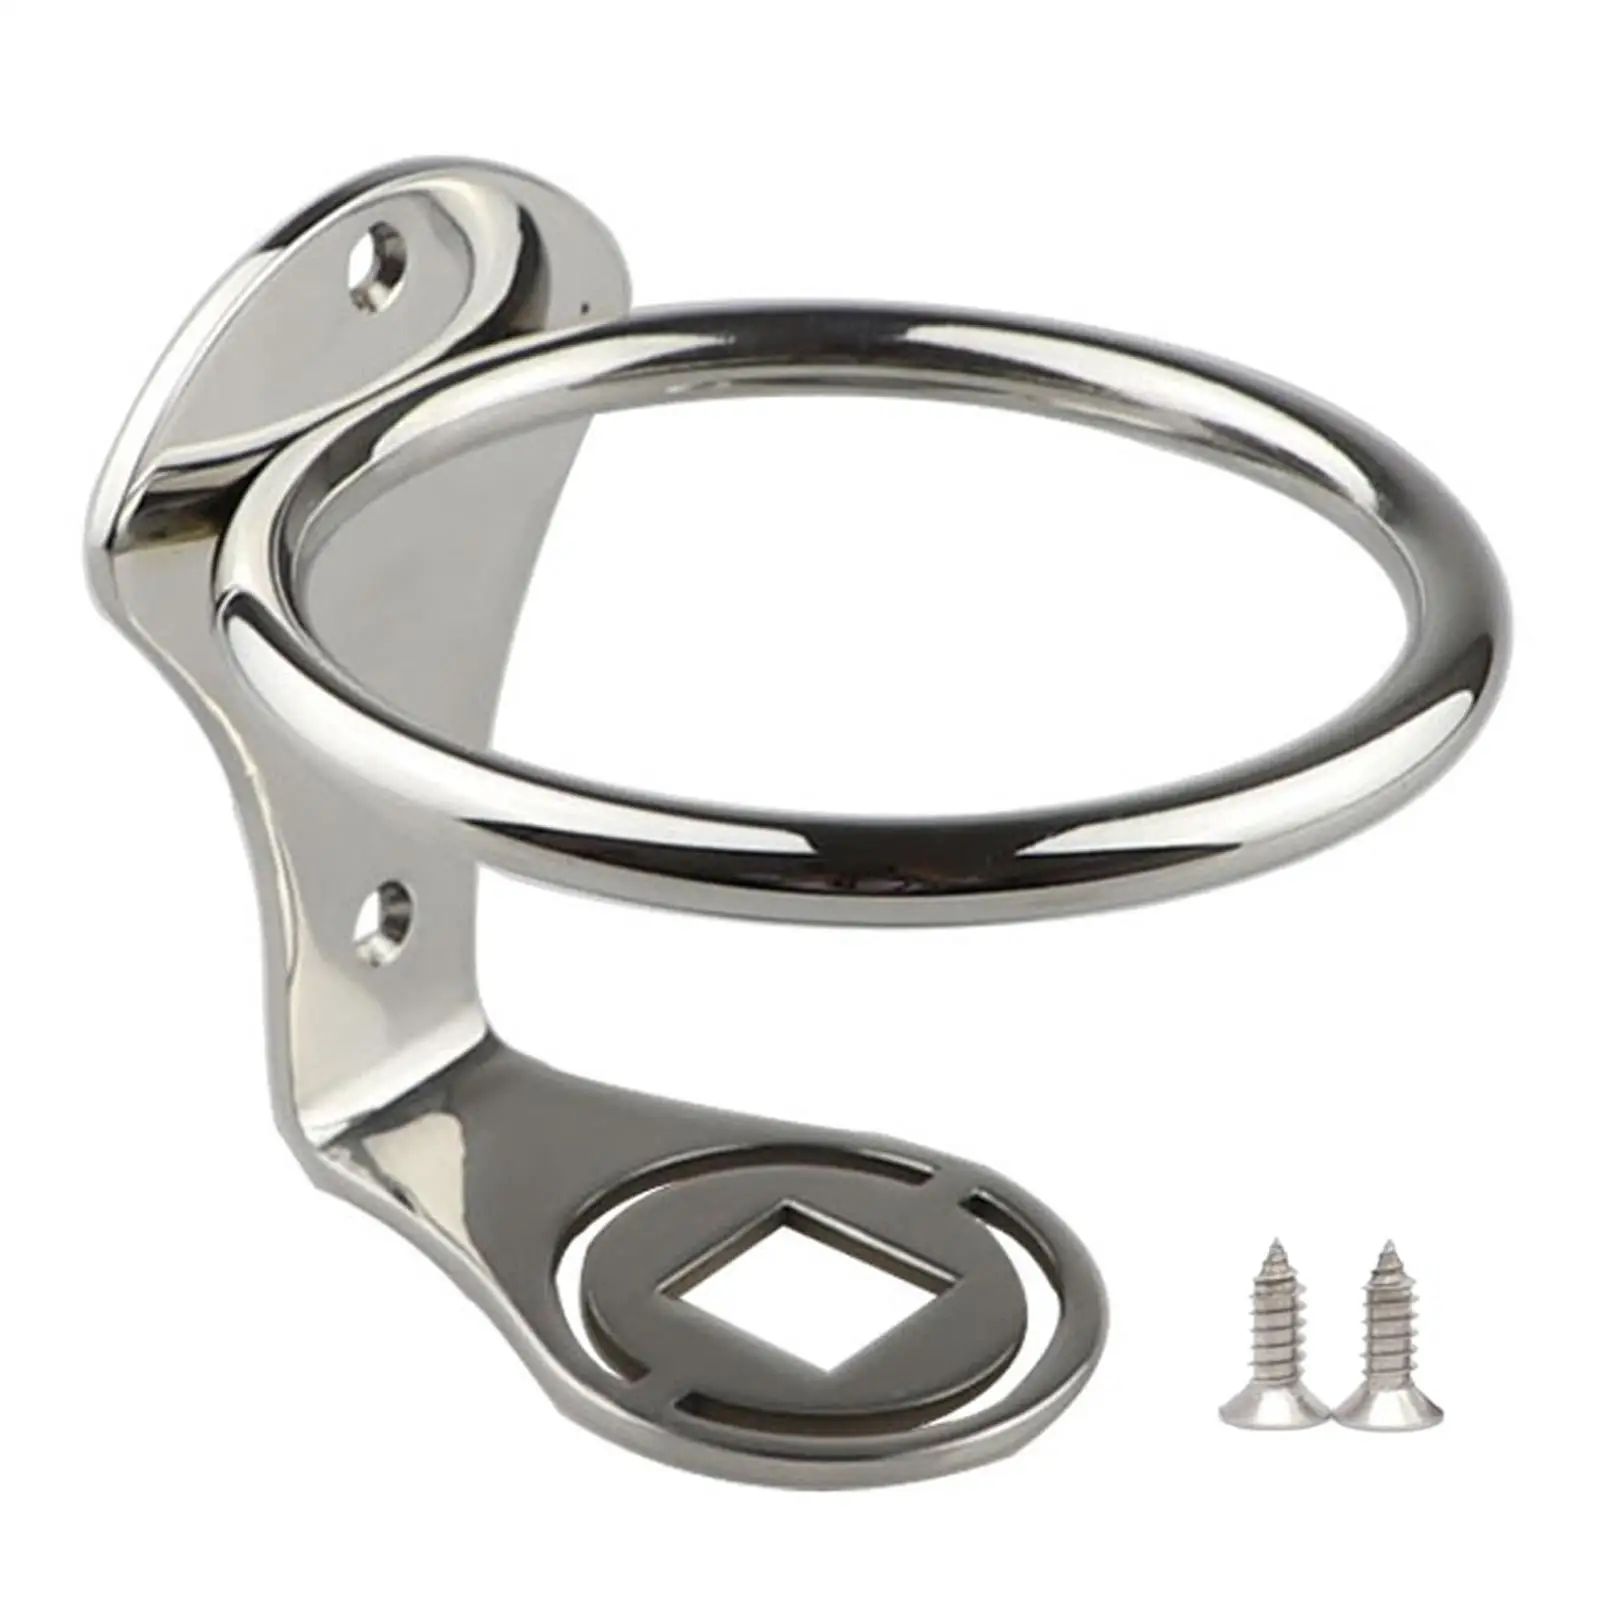 Stainless Steel Boat Drink Bottle Holder for Marine Cups